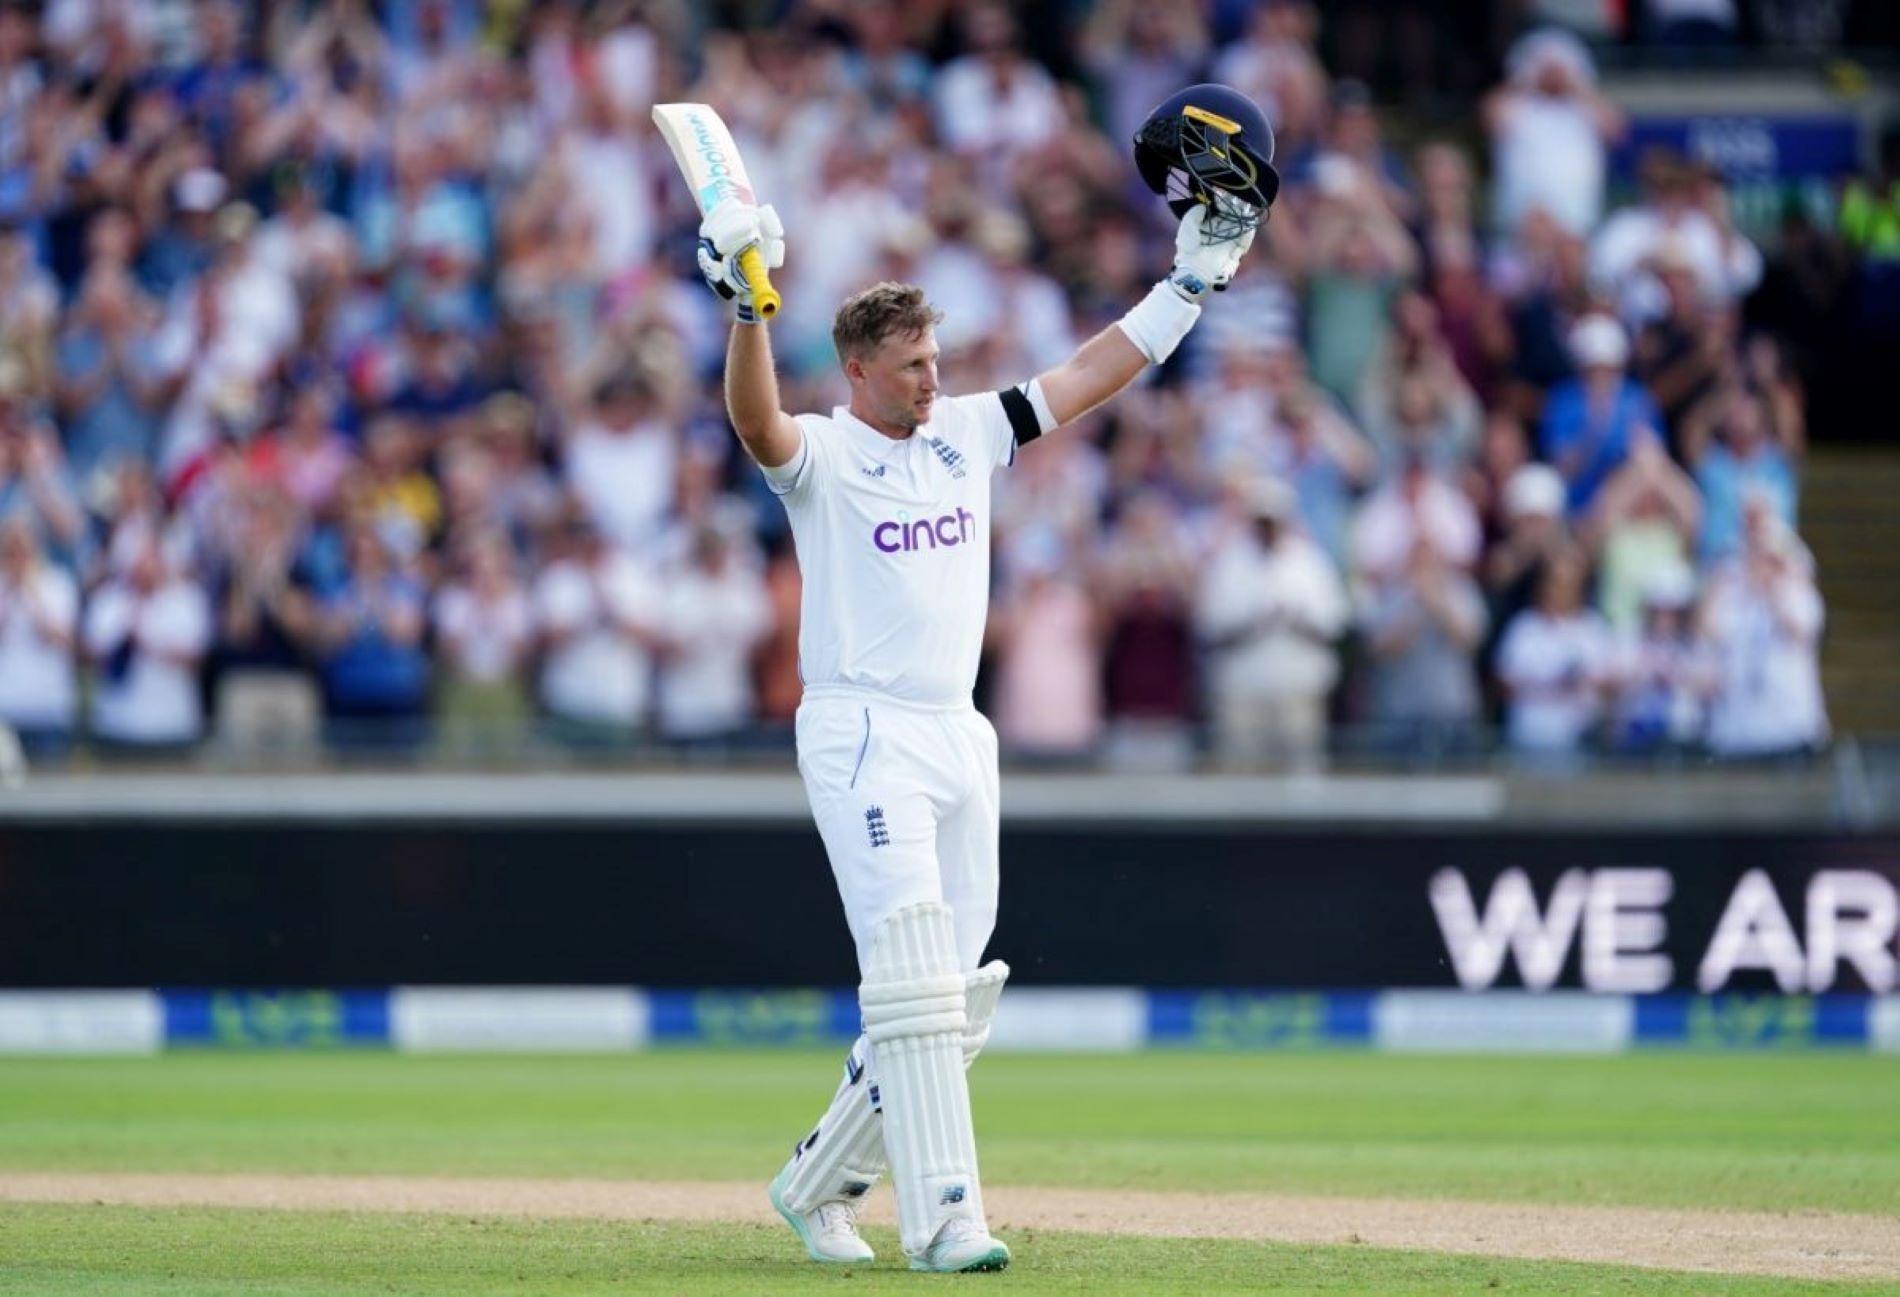 Joe Root will look to produce another big score in a fourth-innings chase